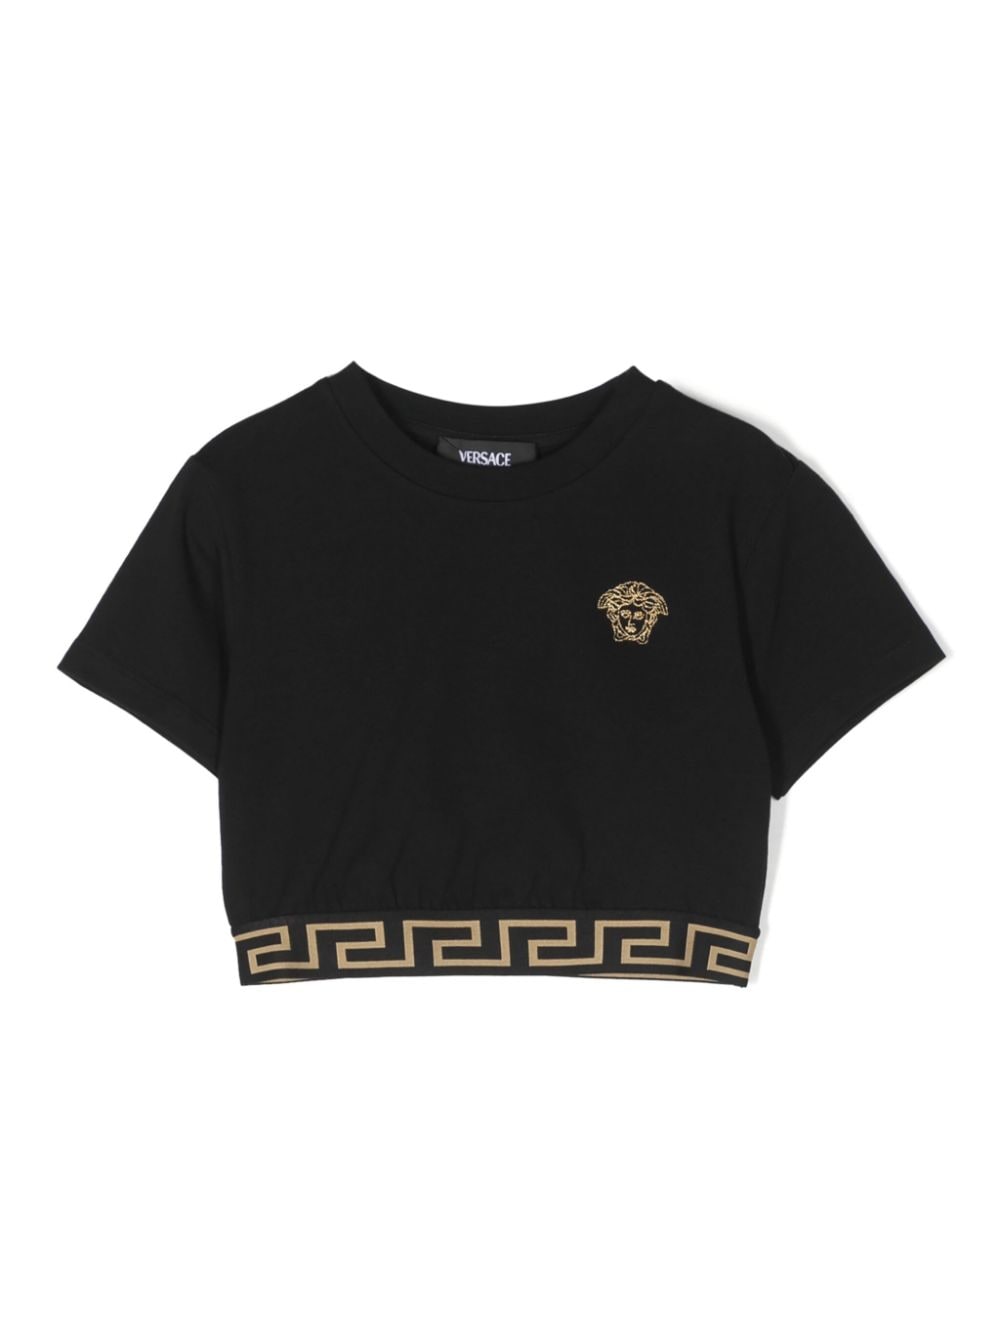 Black t-shirt for girls with logo